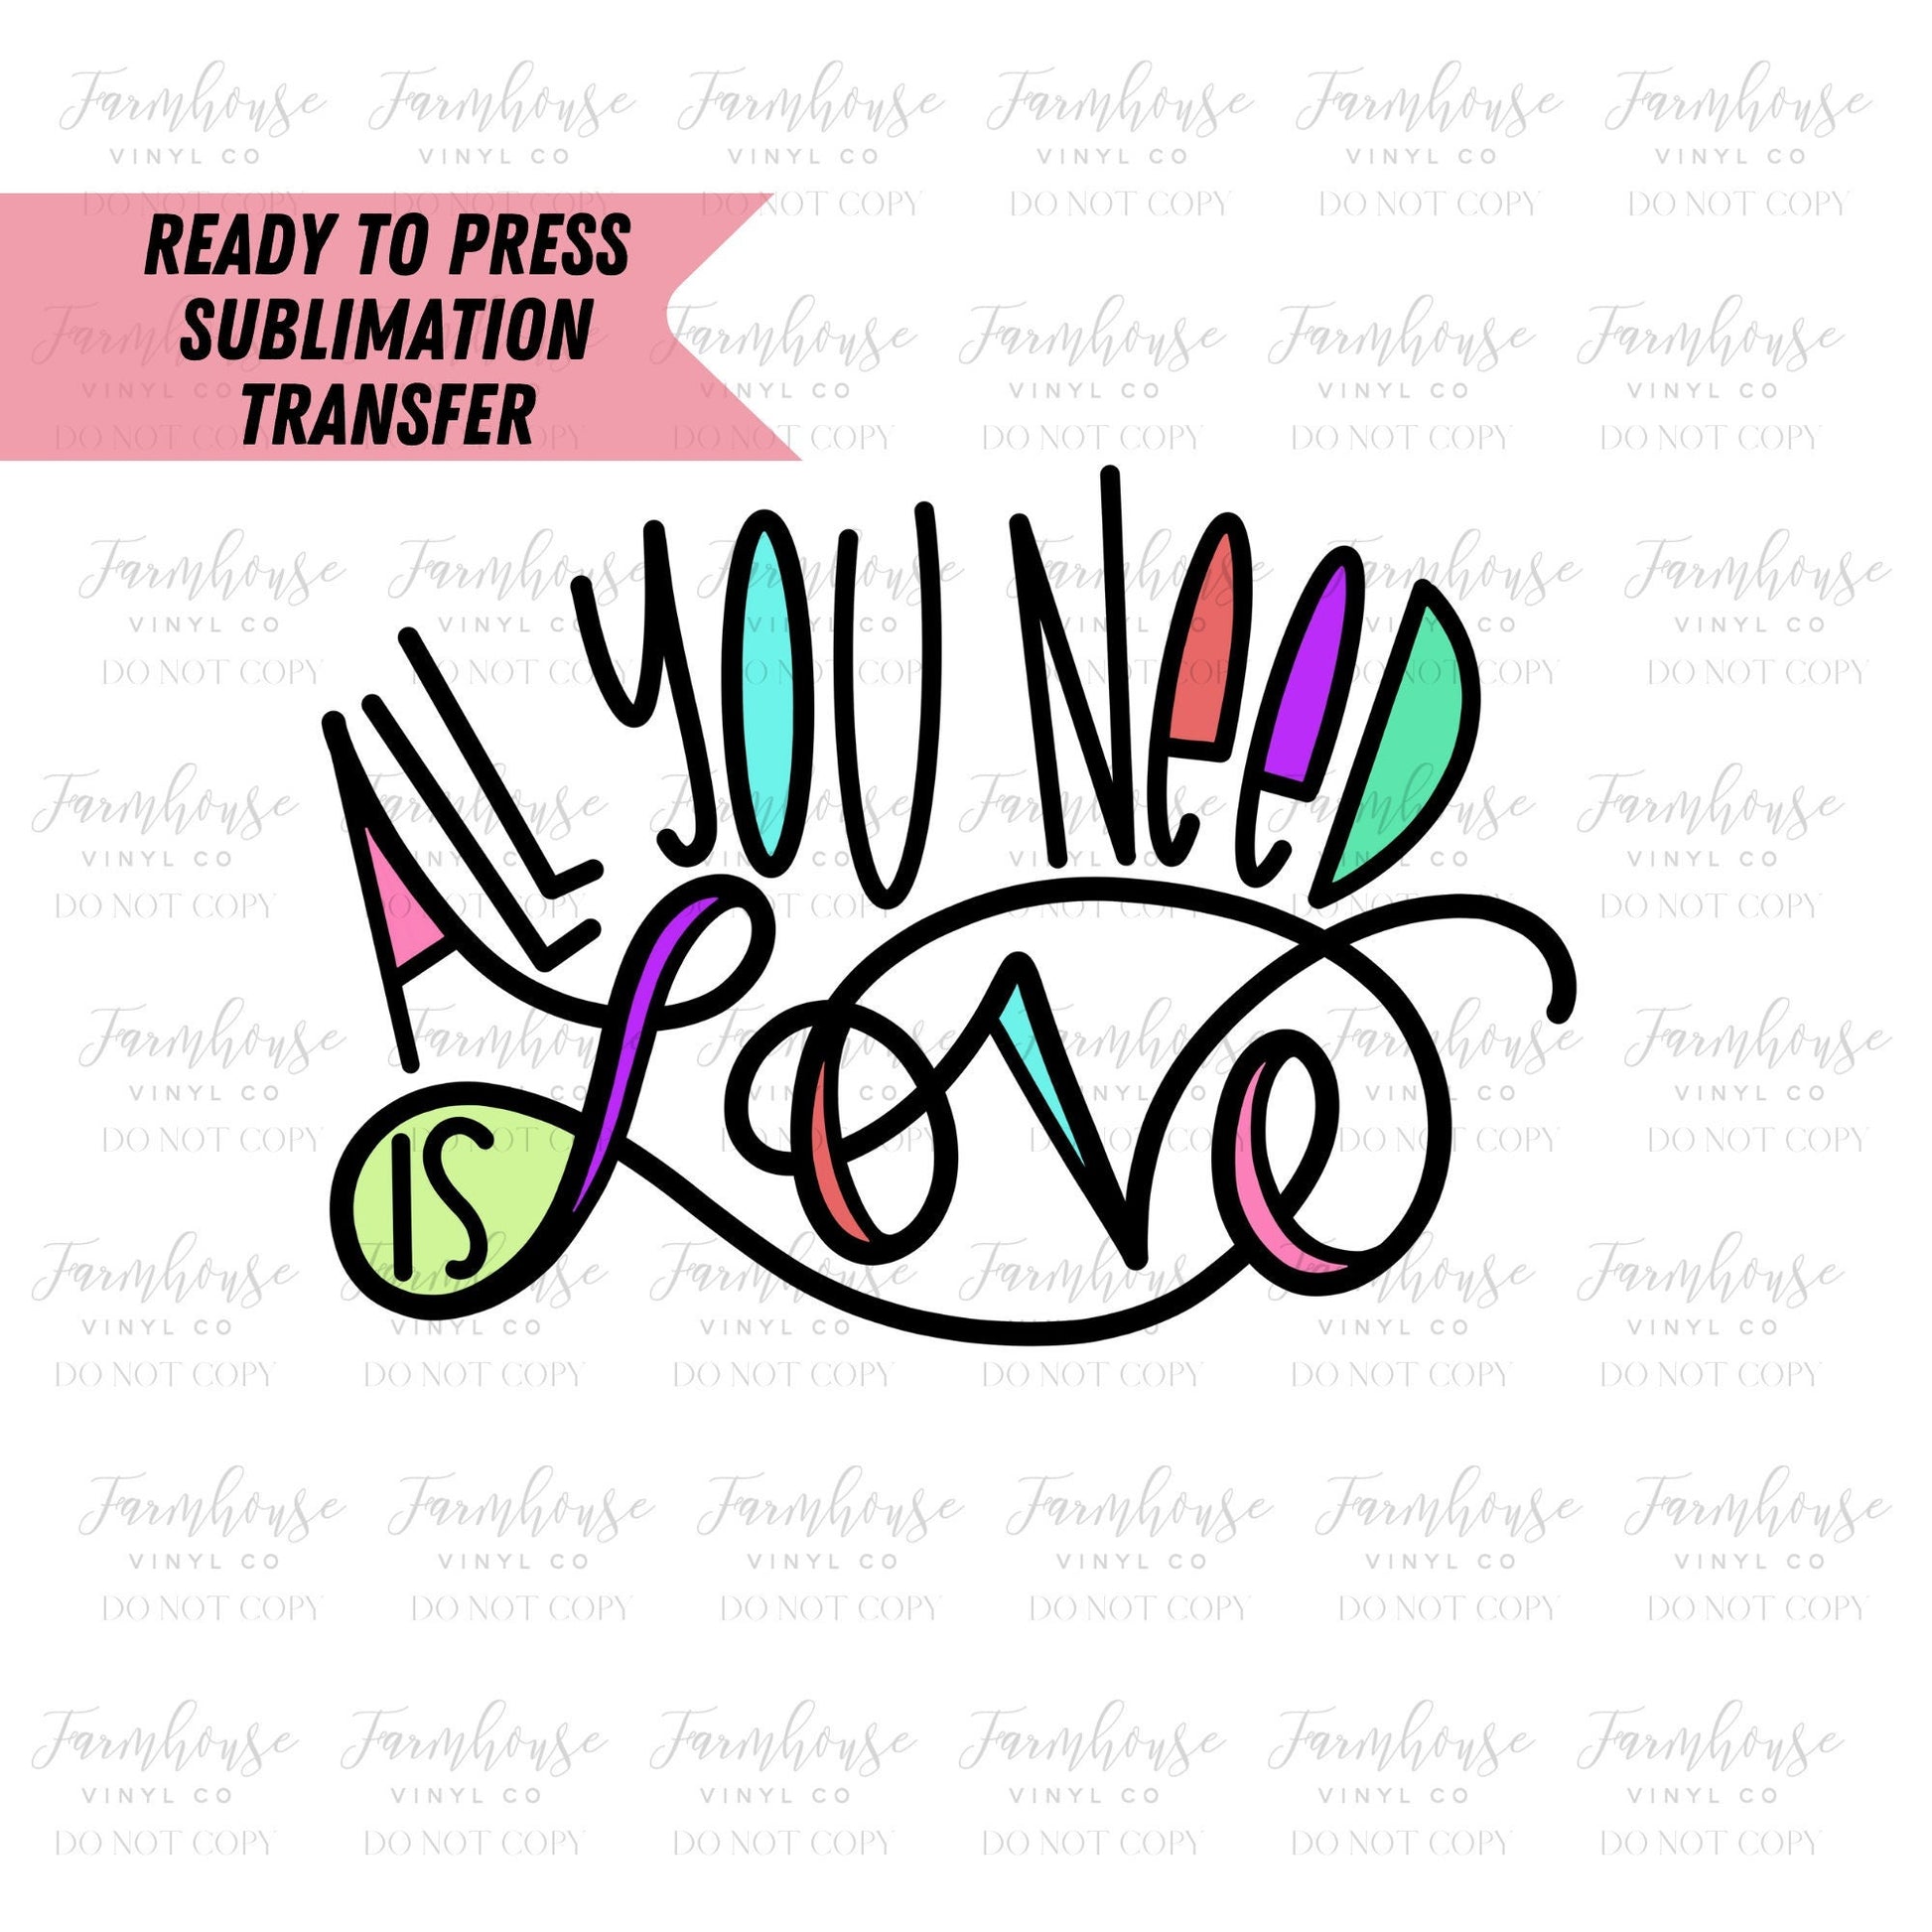 Ready To Press, Sublimation Transfers, DIY Shirt, Sublimation, Transfers Ready To Press, Heat Transfer Designs, All You Need is Love, VDay - Farmhouse Vinyl Co